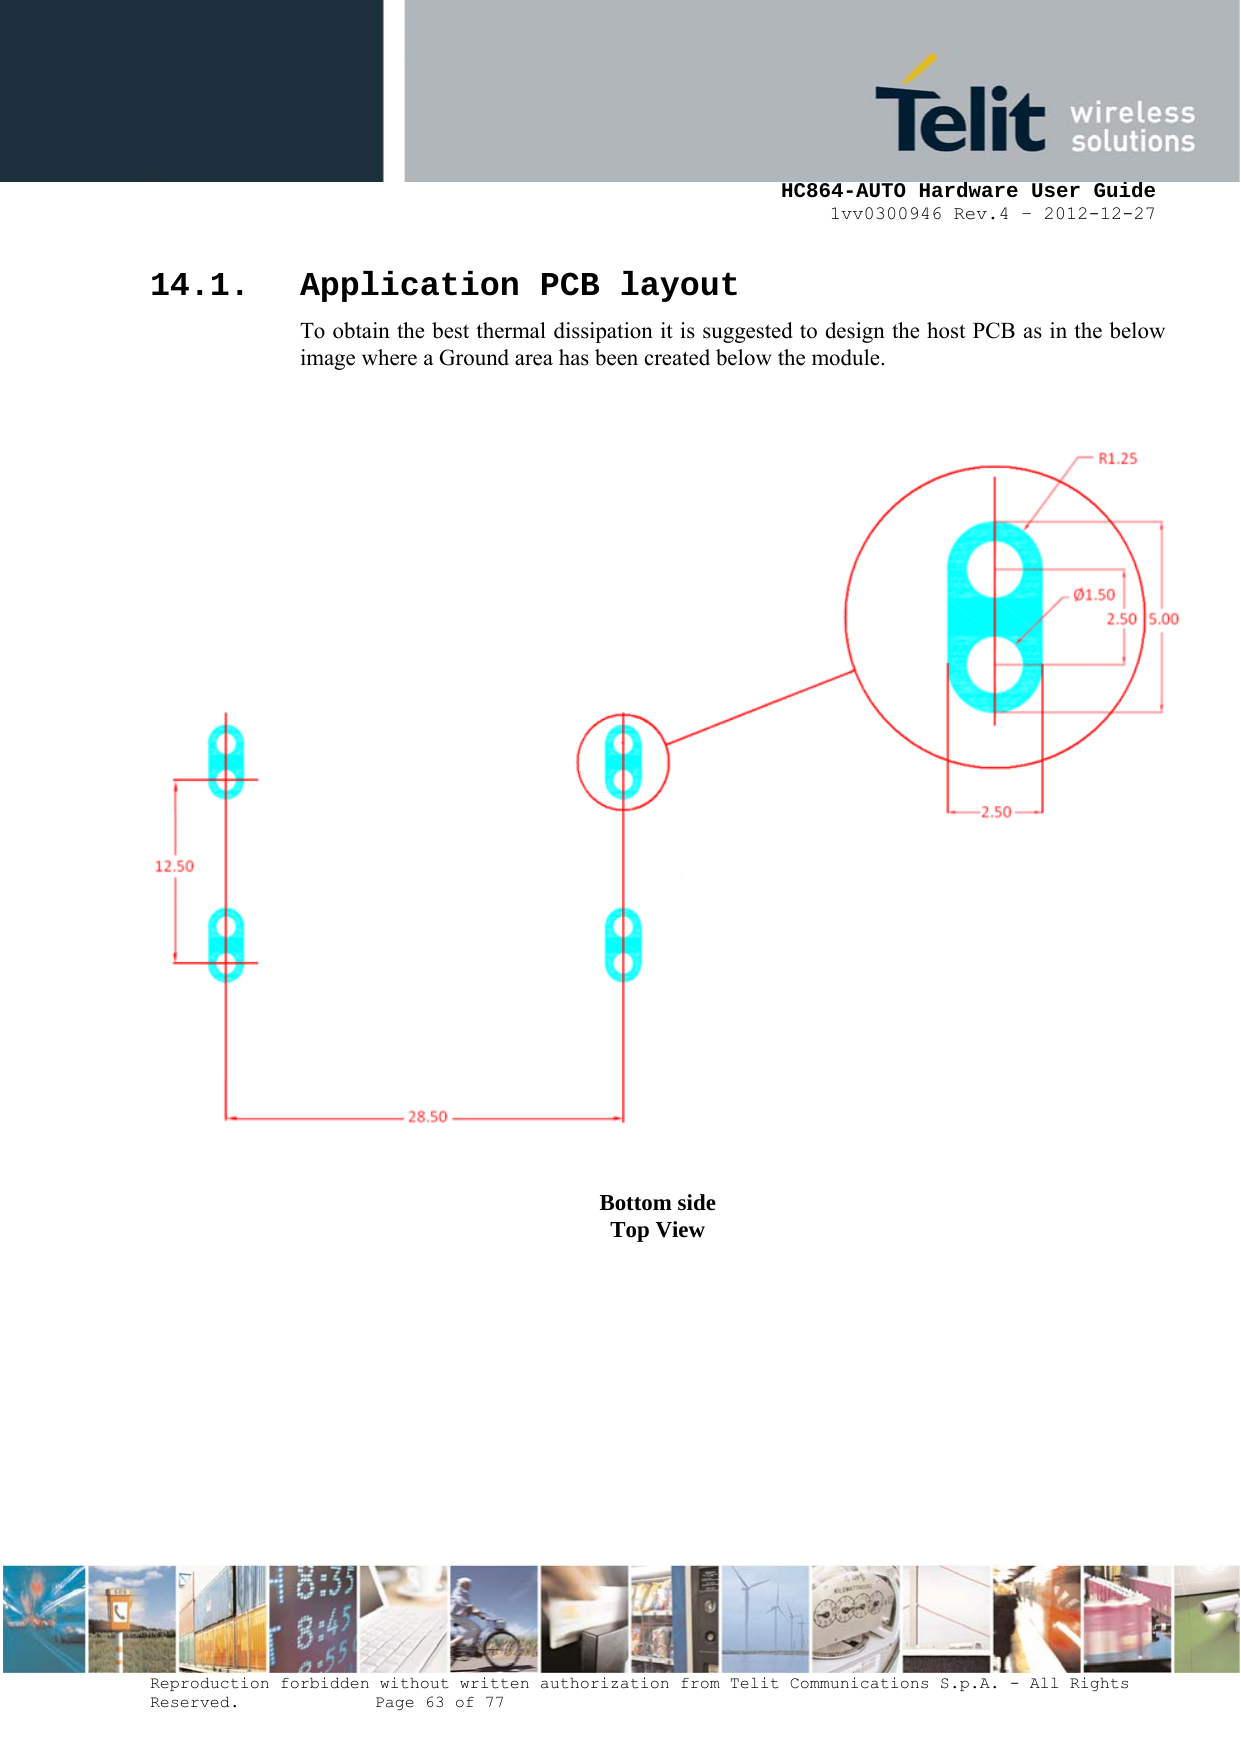     HC864-AUTO Hardware User Guide 1vv0300946 Rev.4 – 2012-12-27 Reproduction forbidden without written authorization from Telit Communications S.p.A. - All Rights Reserved.    Page 63 of 77  14.1. Application PCB layout To obtain the best thermal dissipation it is suggested to design the host PCB as in the below image where a Ground area has been created below the module.       Bottom side Top View 